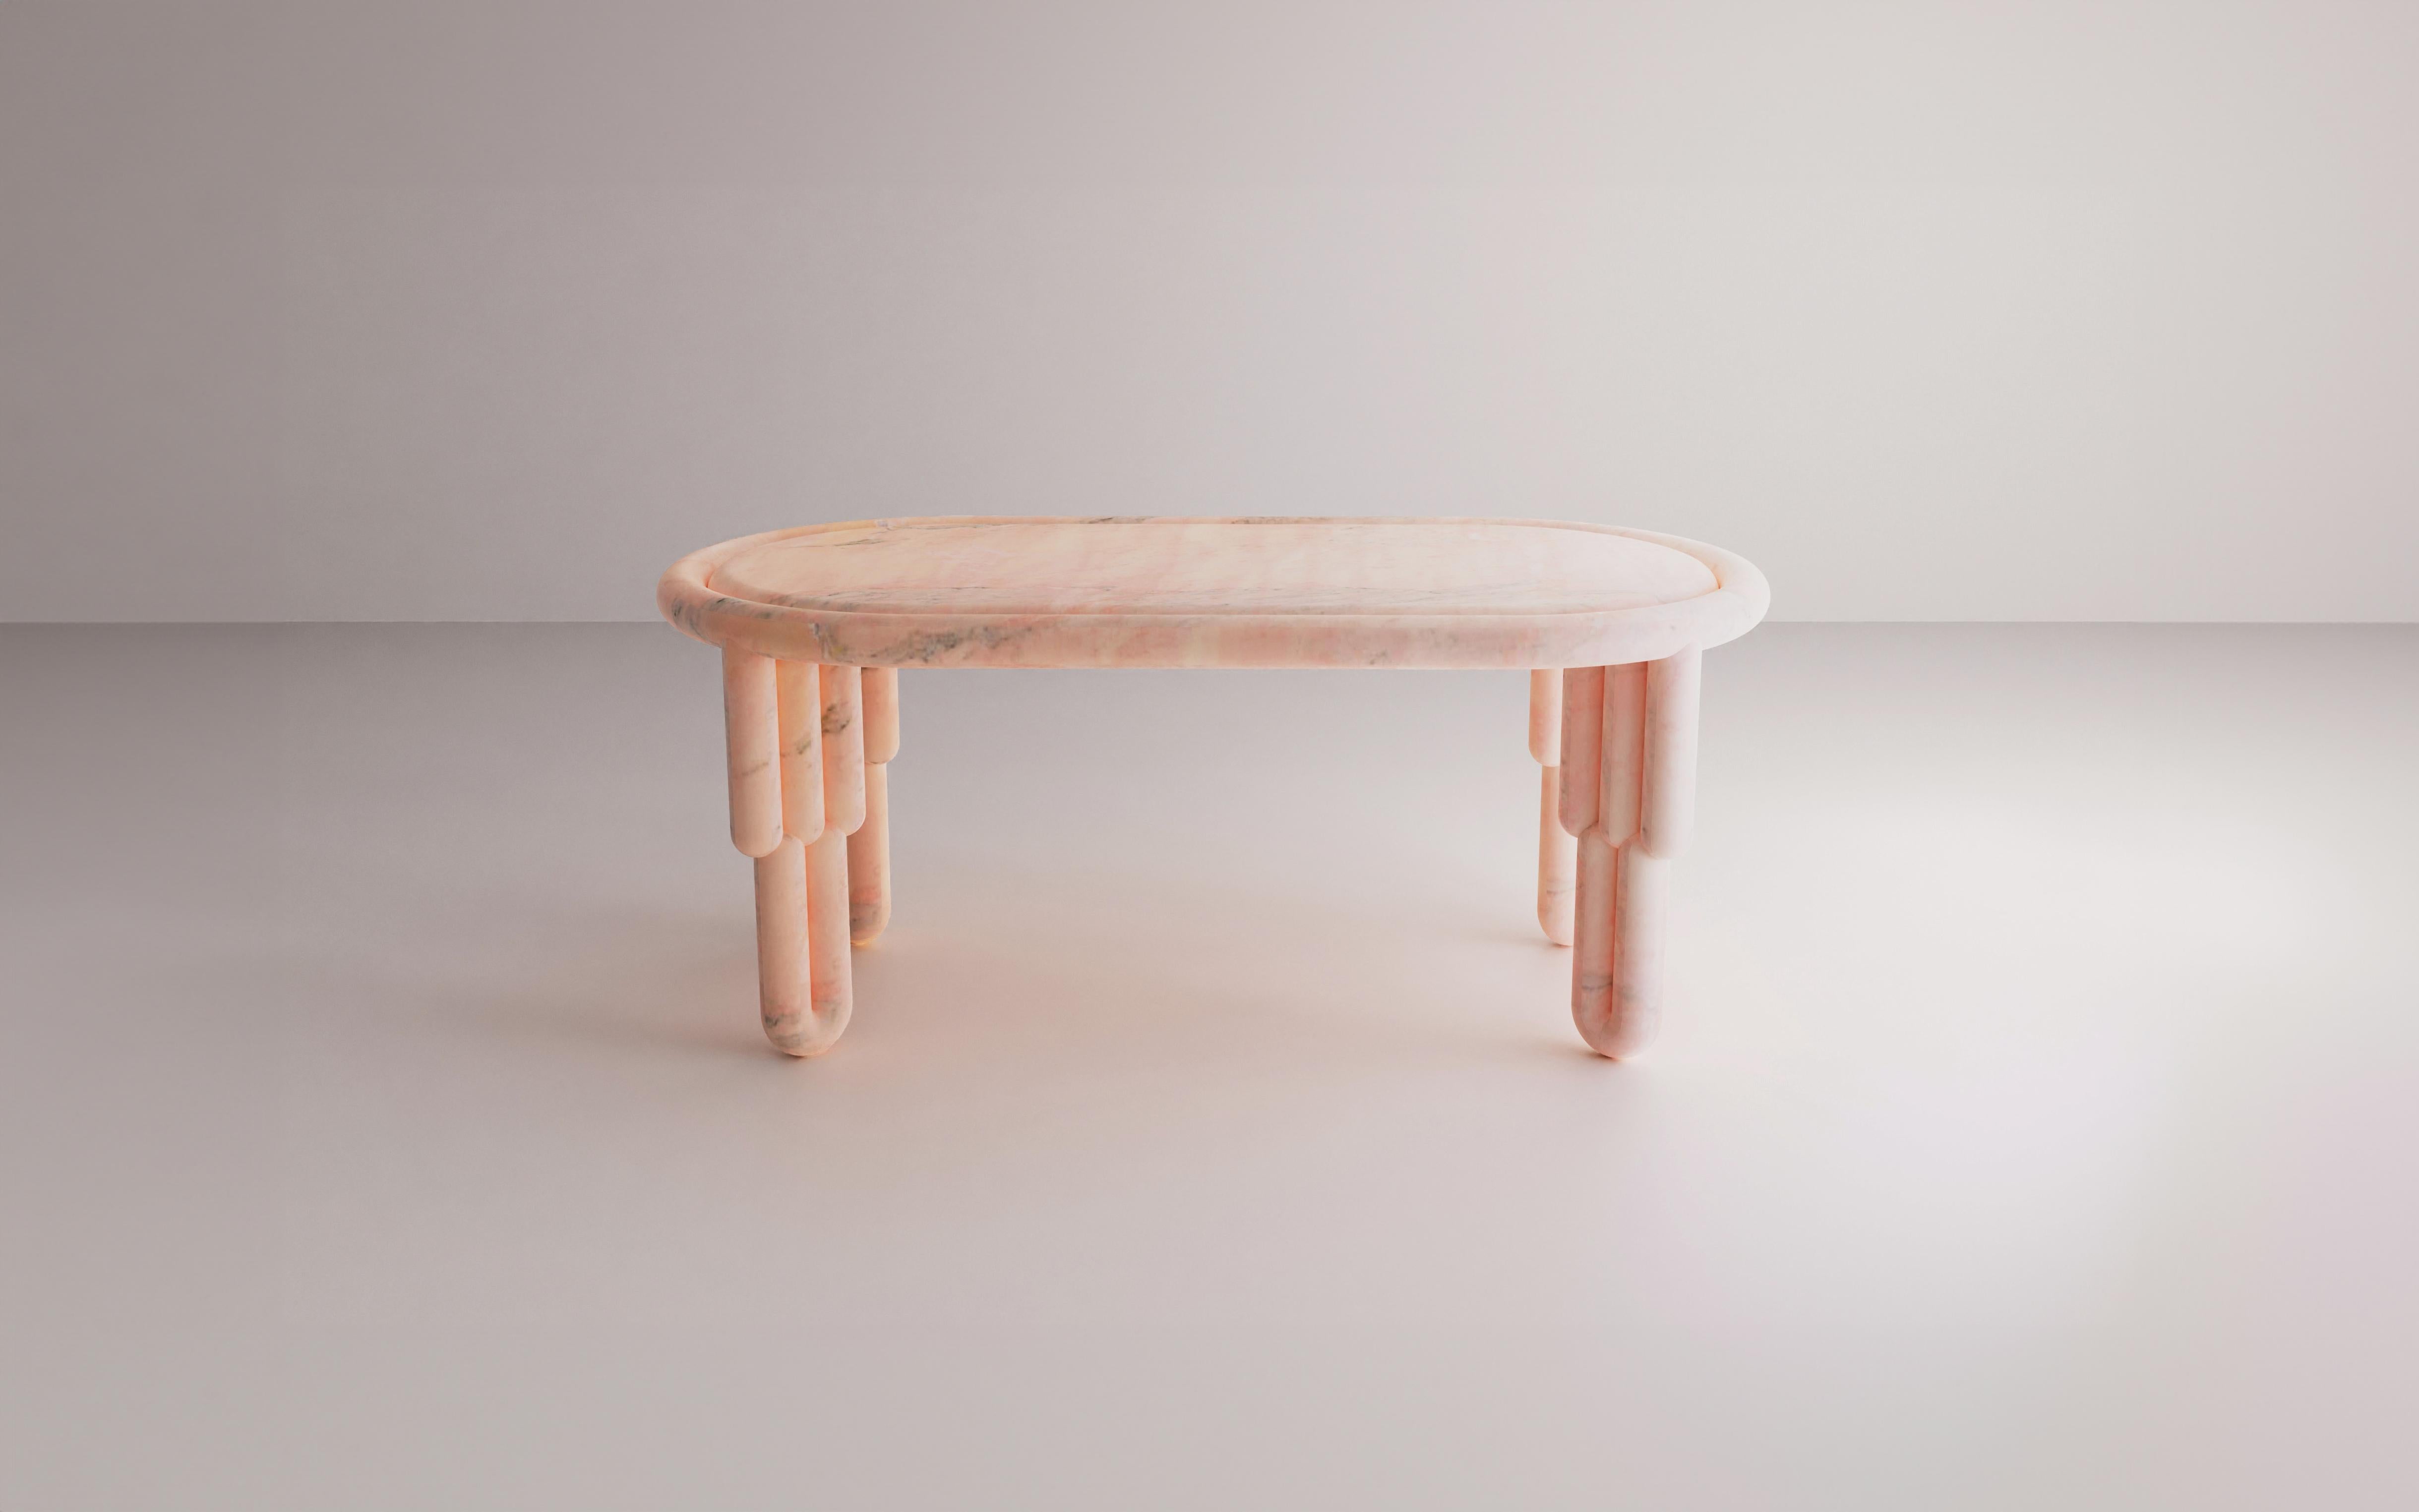 The Kipferl dining table features oblong top which is encased into circular round profile. It features sculptural legs of three batons which are supported at the bottom with curved ending of two batons. The table comes in 180 cm and 220 cm lengths,